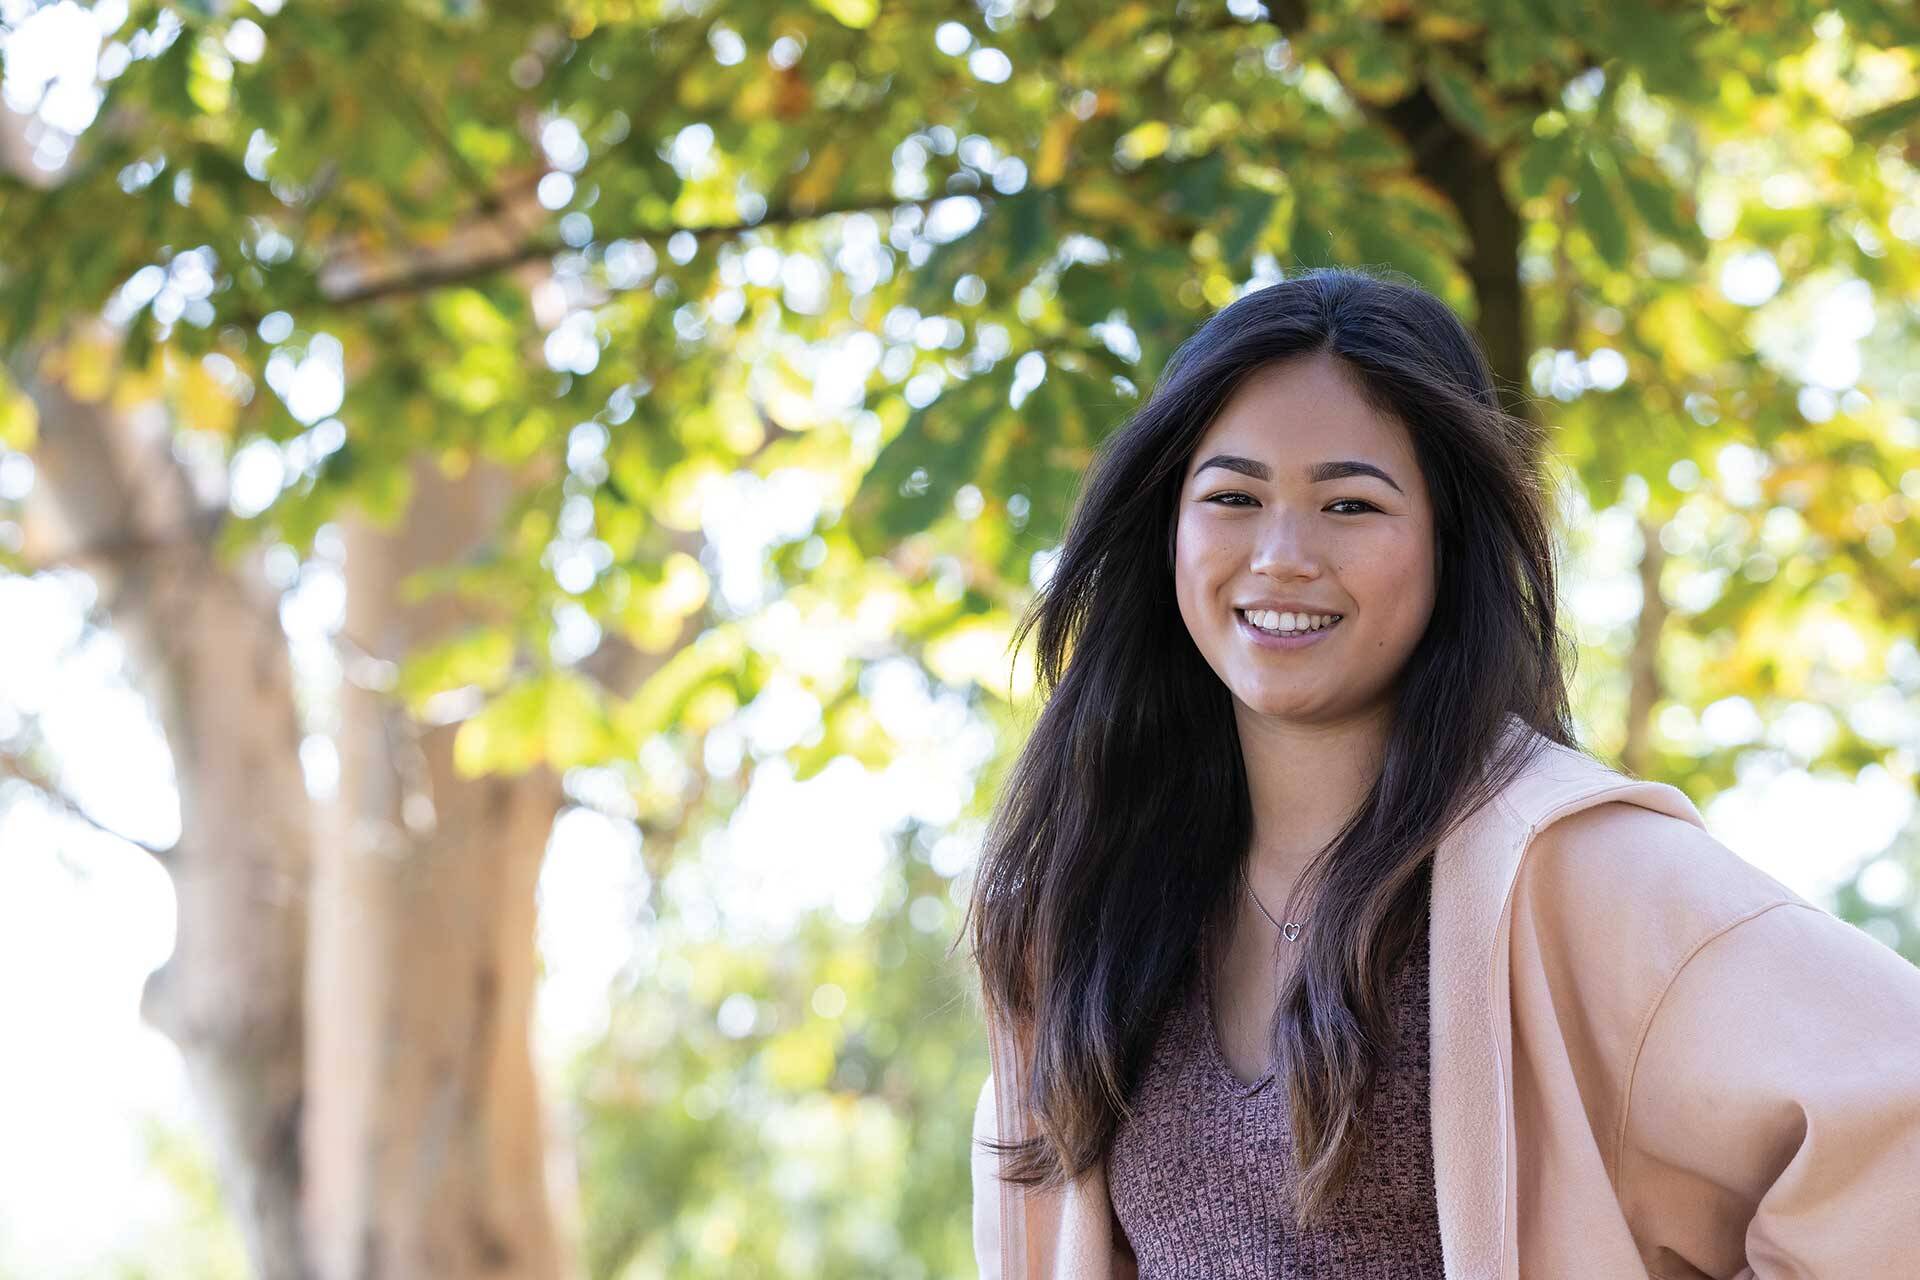 Young woman smiling, with trees in the background.